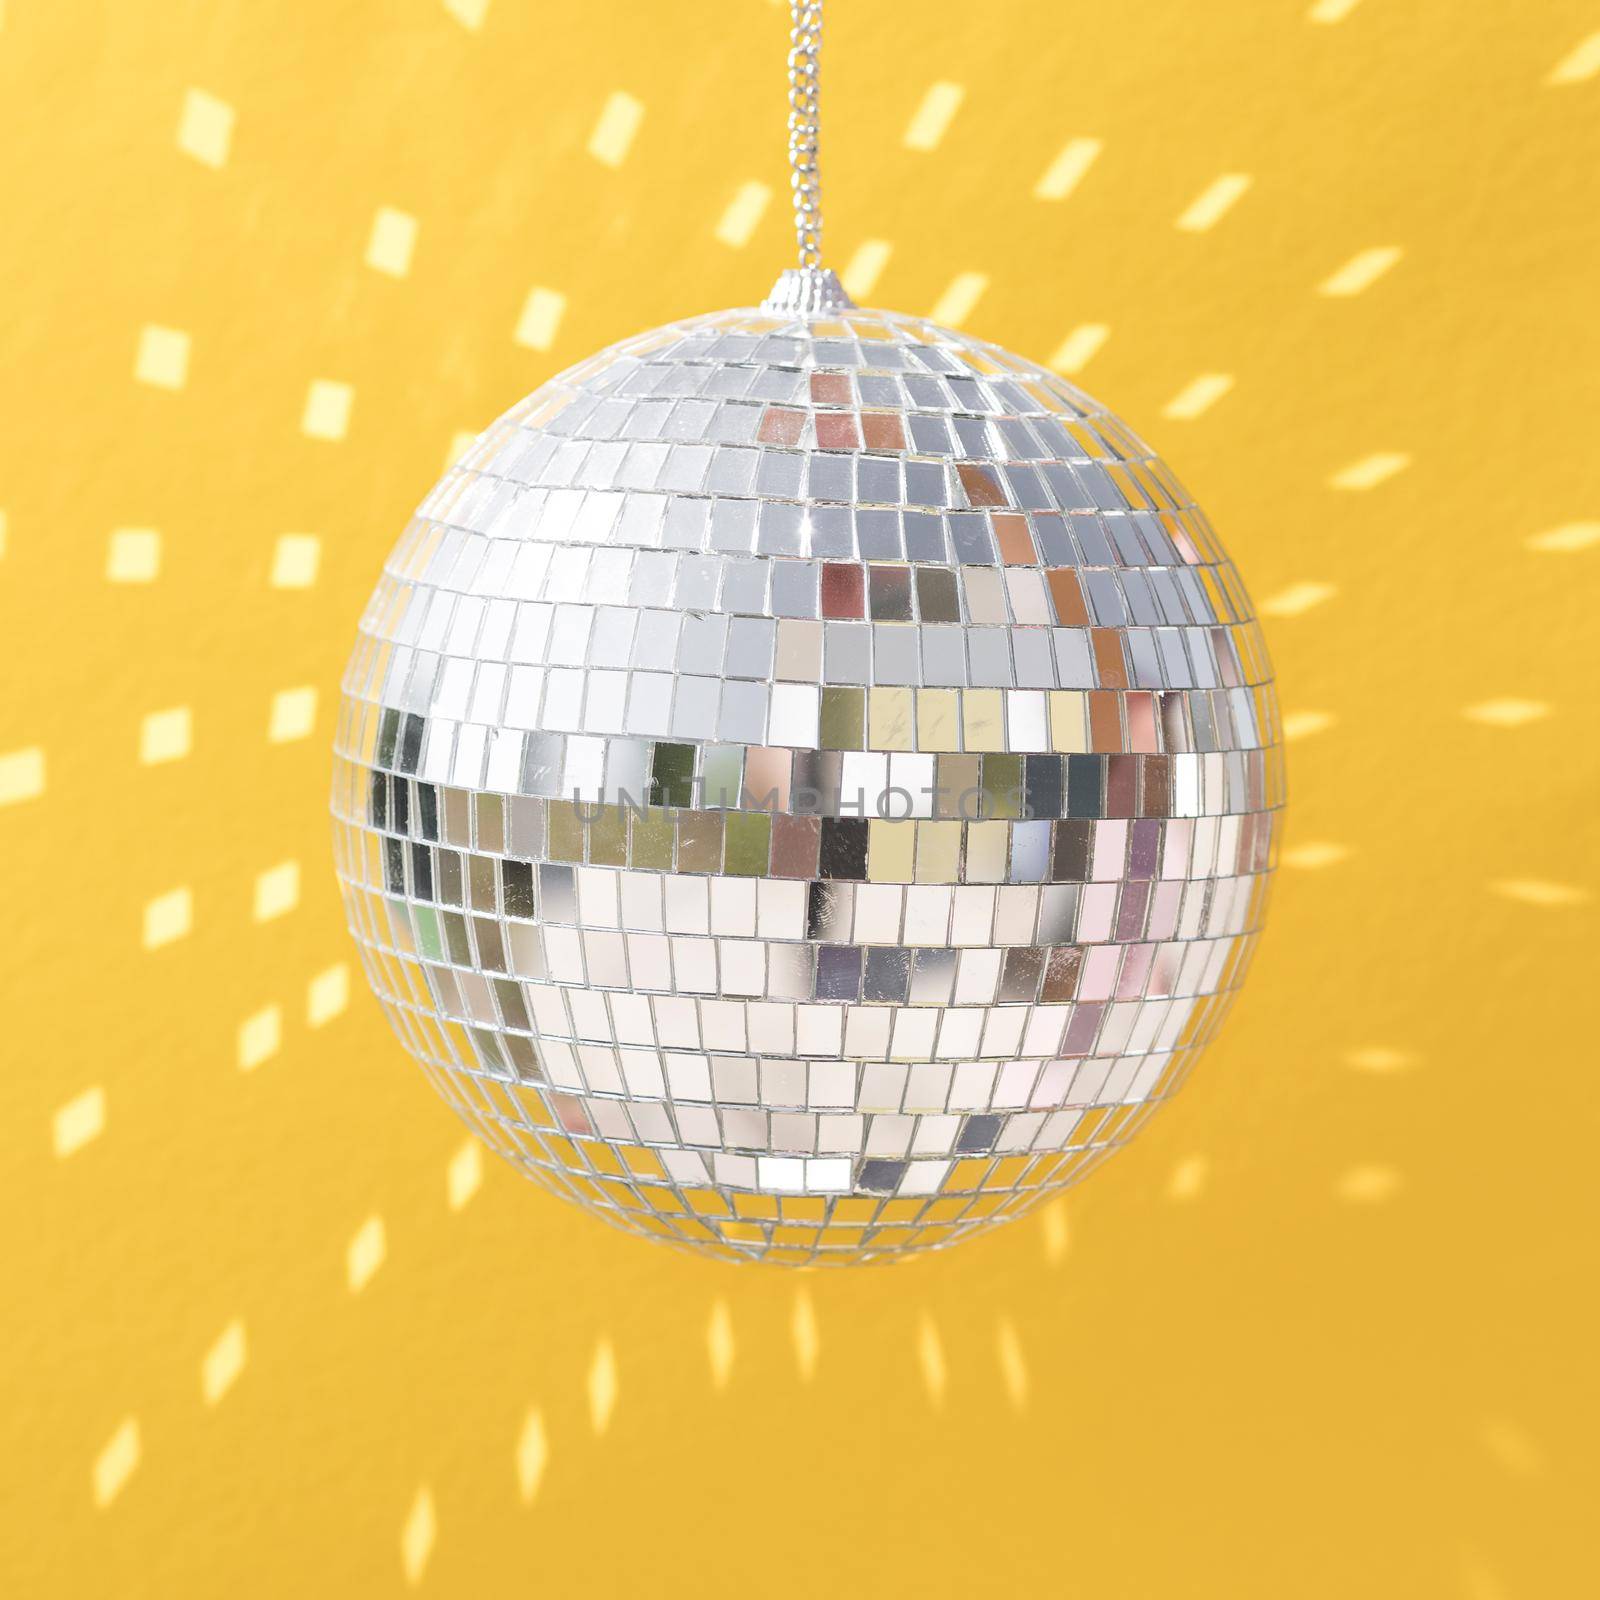 beautiful new year concept with disco ball